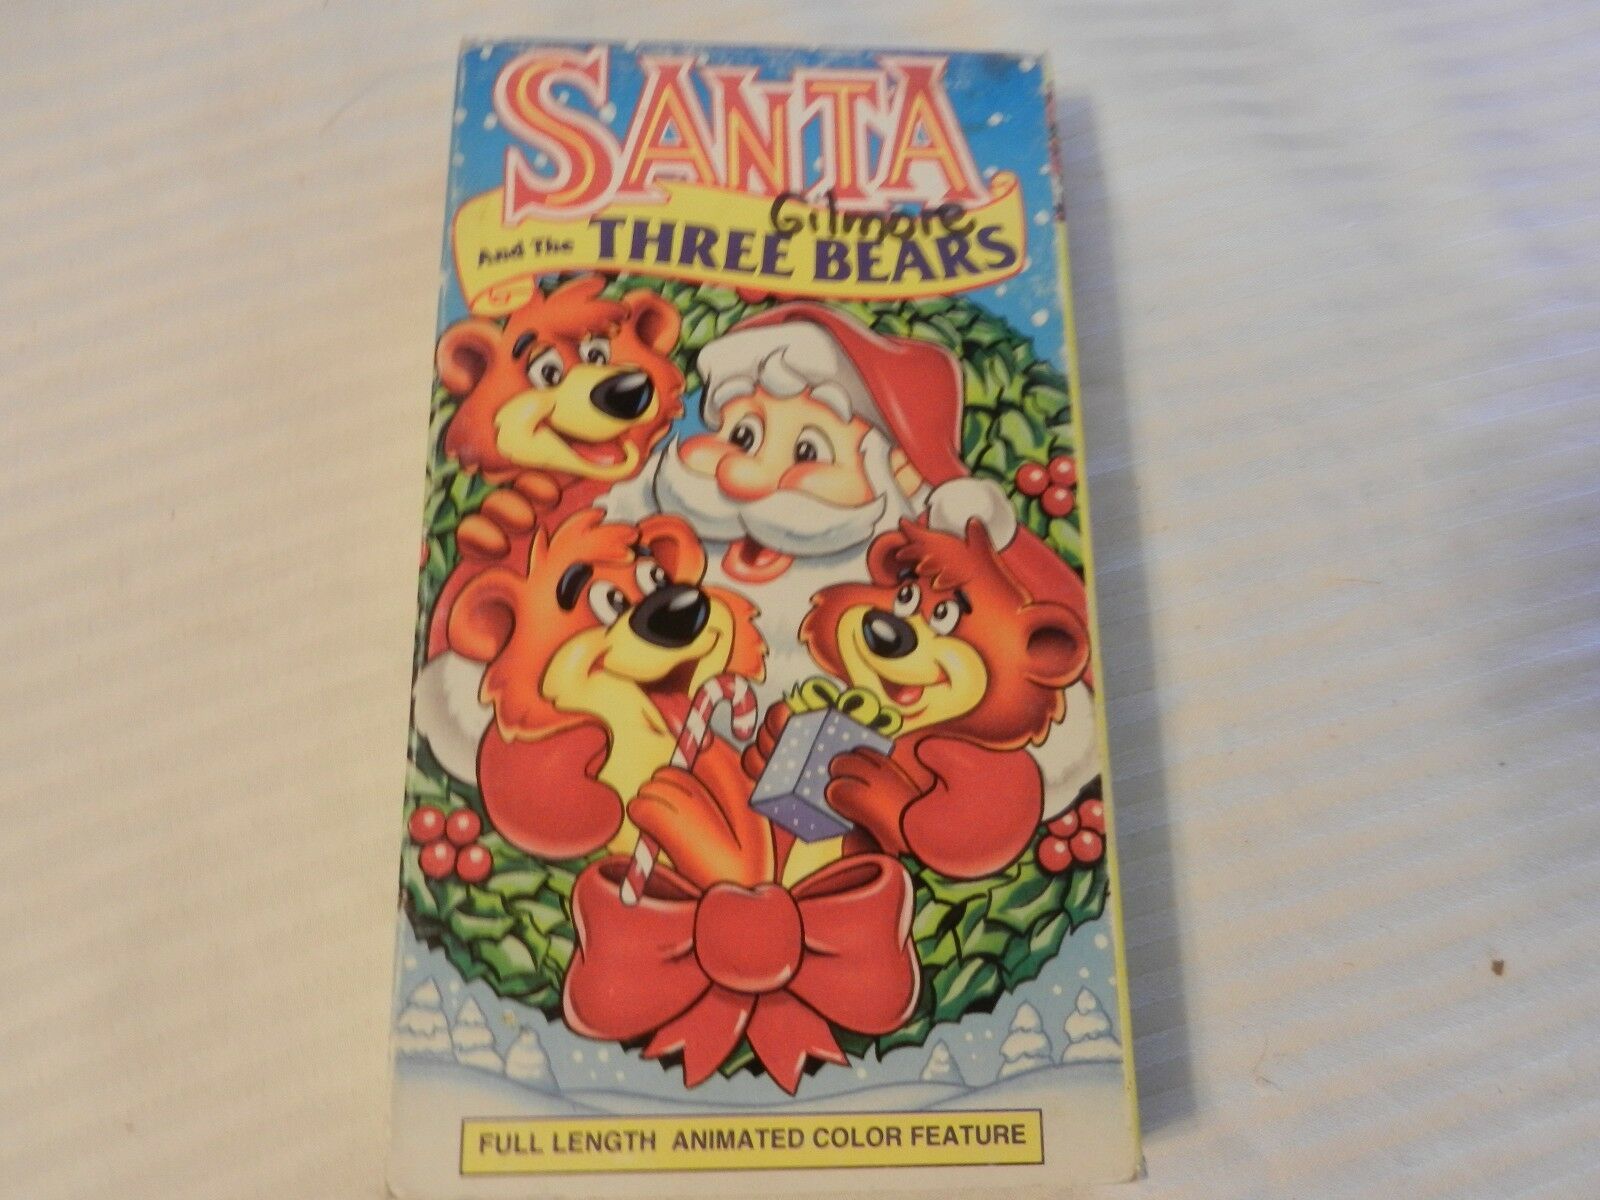 Santa and The Three Bears VHS 1992 from Good Times Video - VHS Tapes